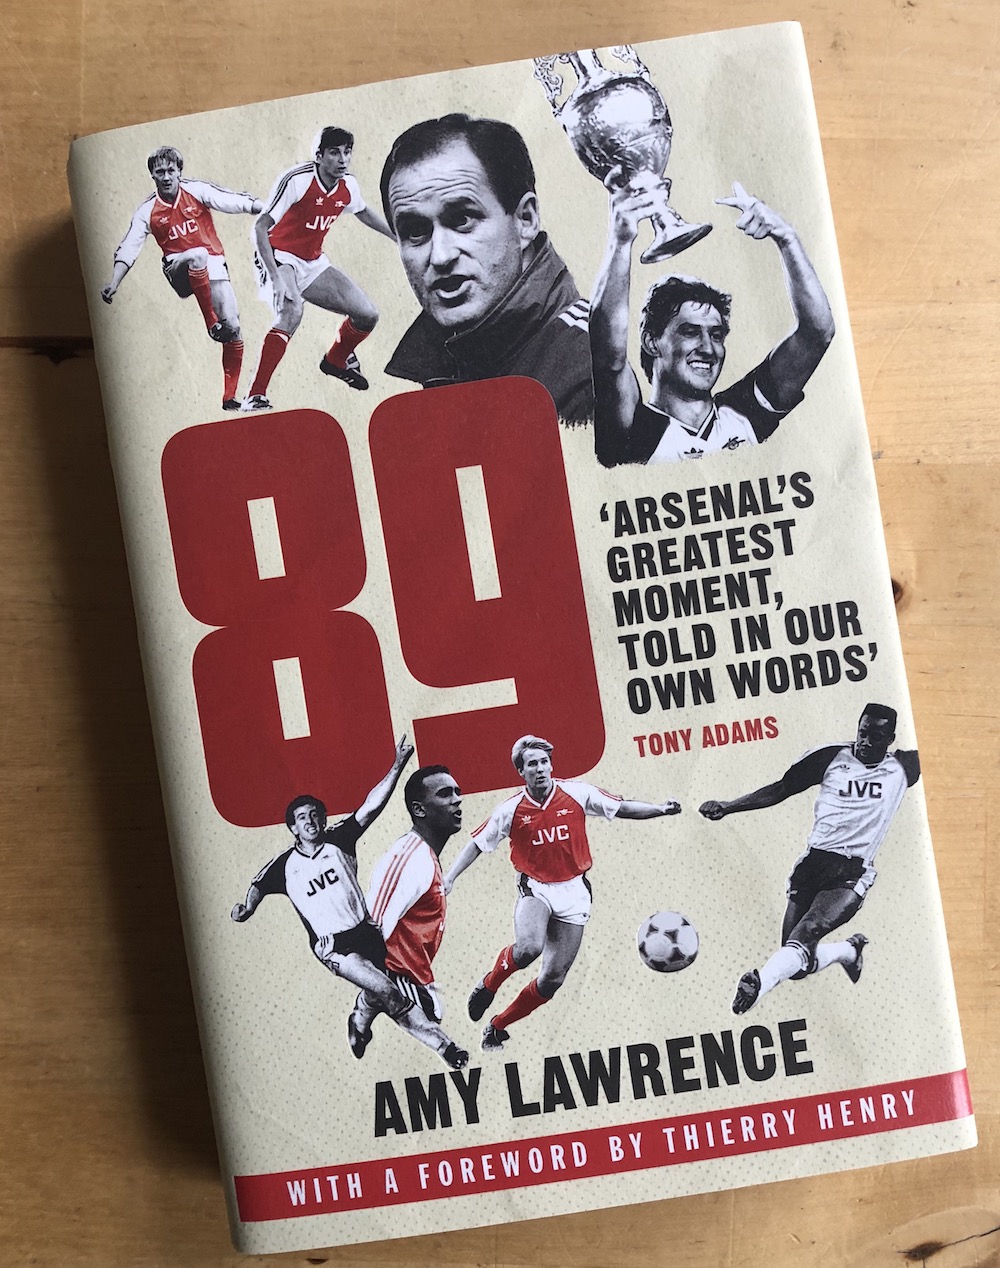 It’s up for grabs now? - Win a copy of the new ‘89’ book by Amy Lawrence